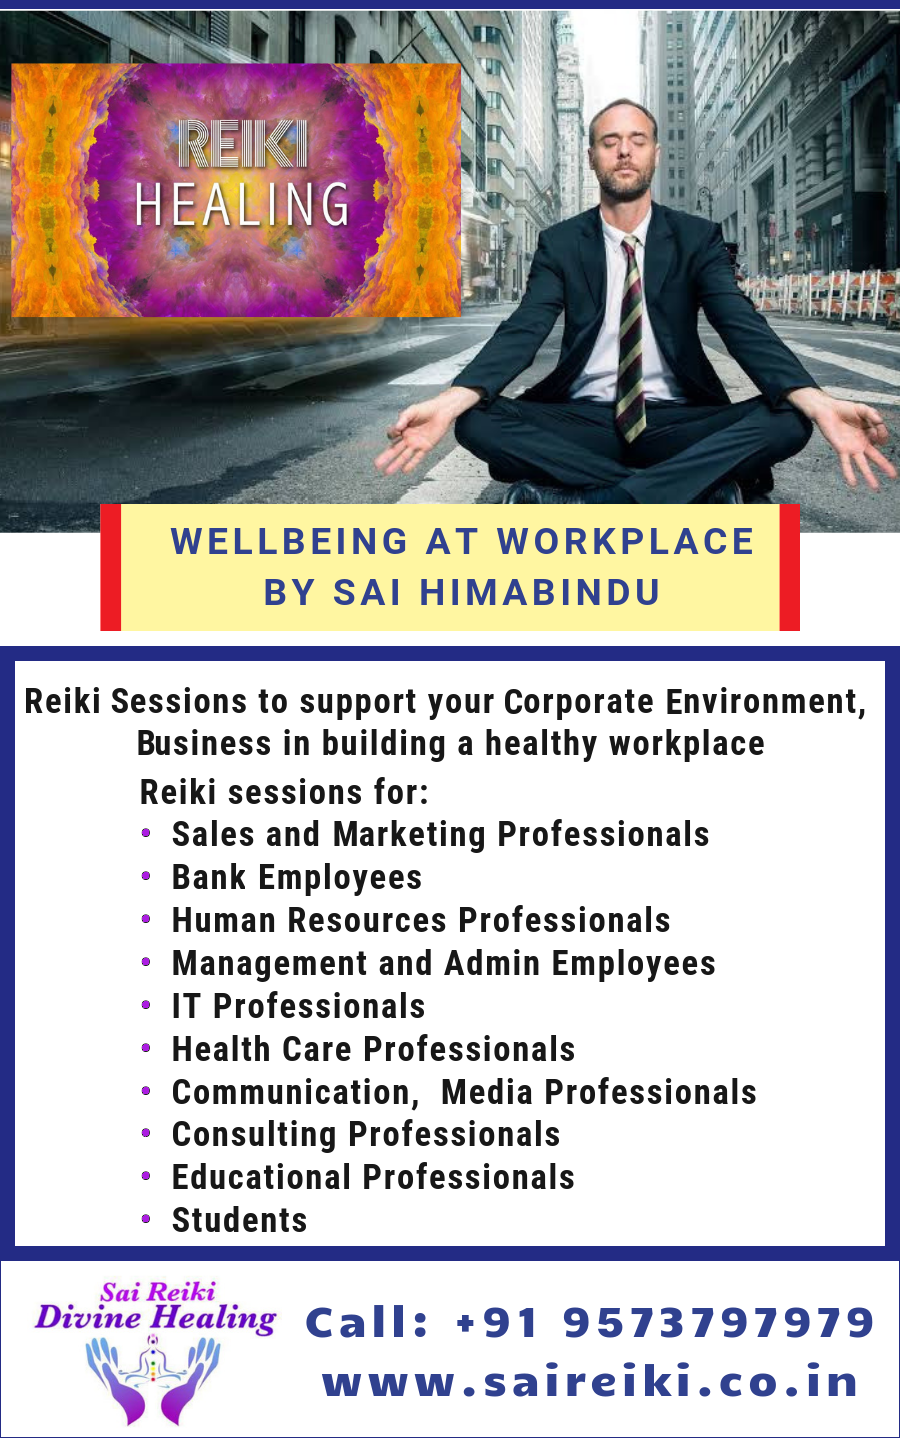 Wellbeing and Stress Management at workplace by Sai Hima Bindu - Coimbatore